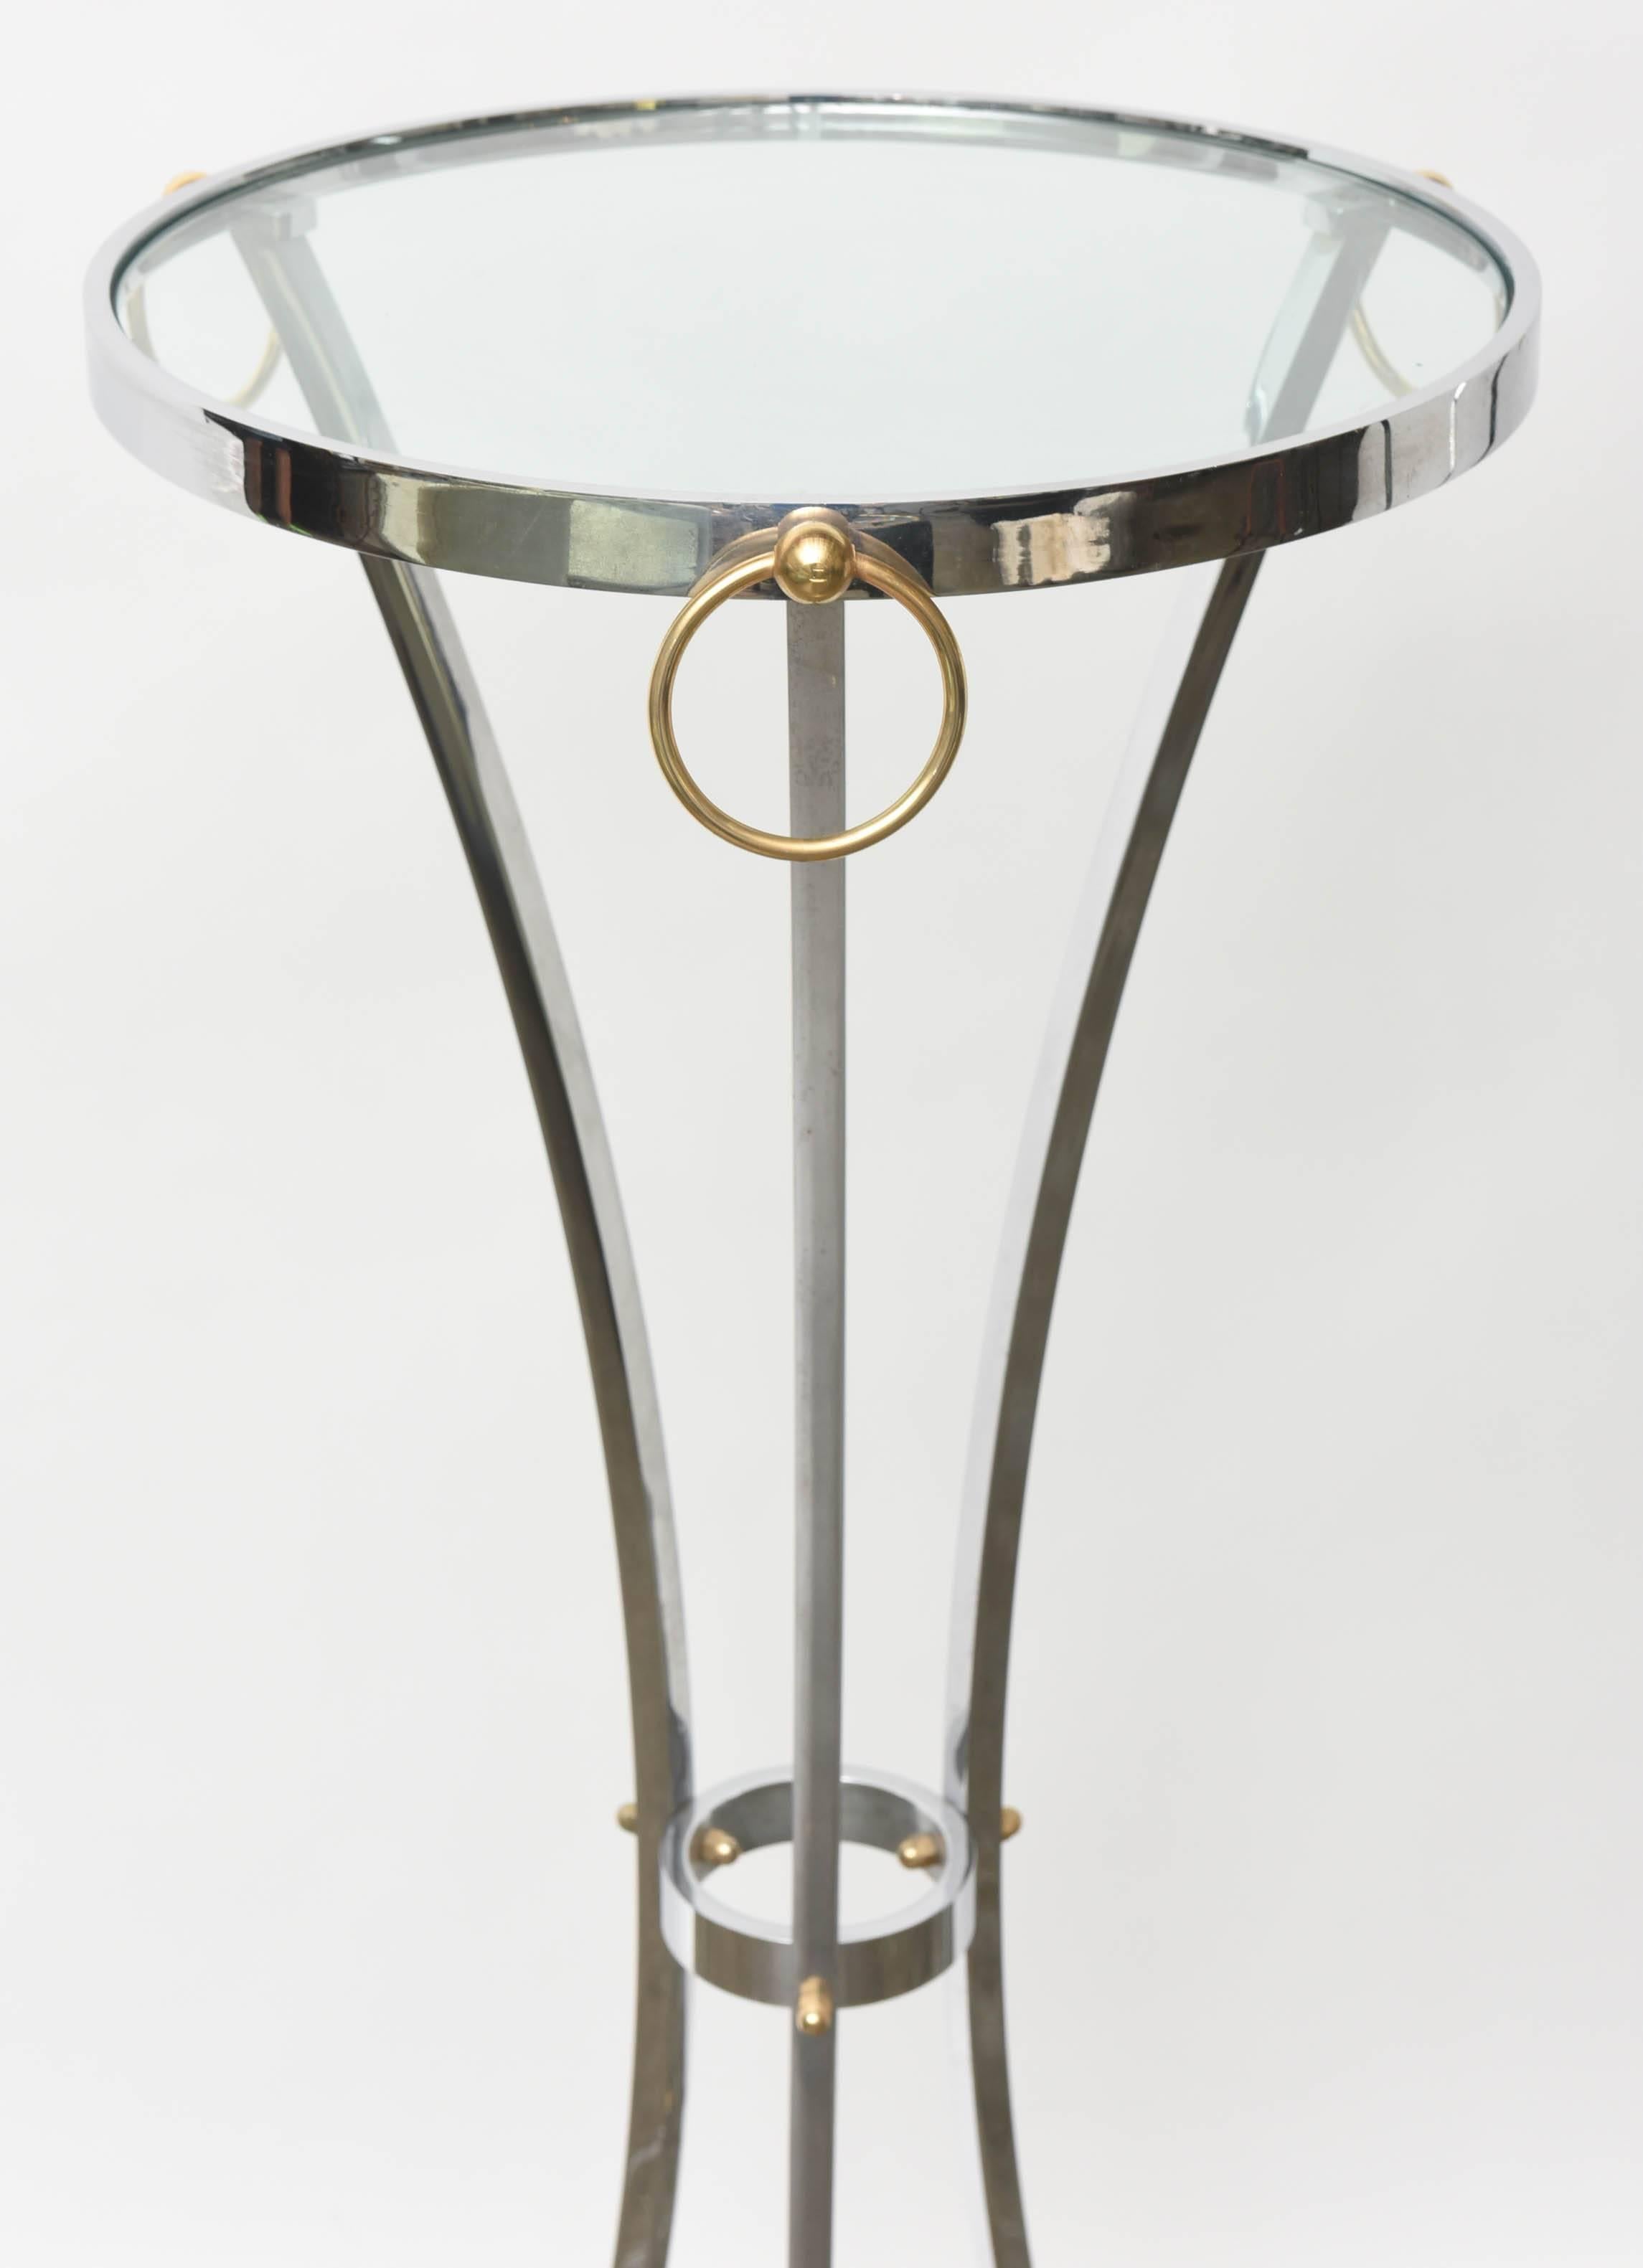 Elegant pair of chrome and brass neo classical pedestals by Maison Jansen.